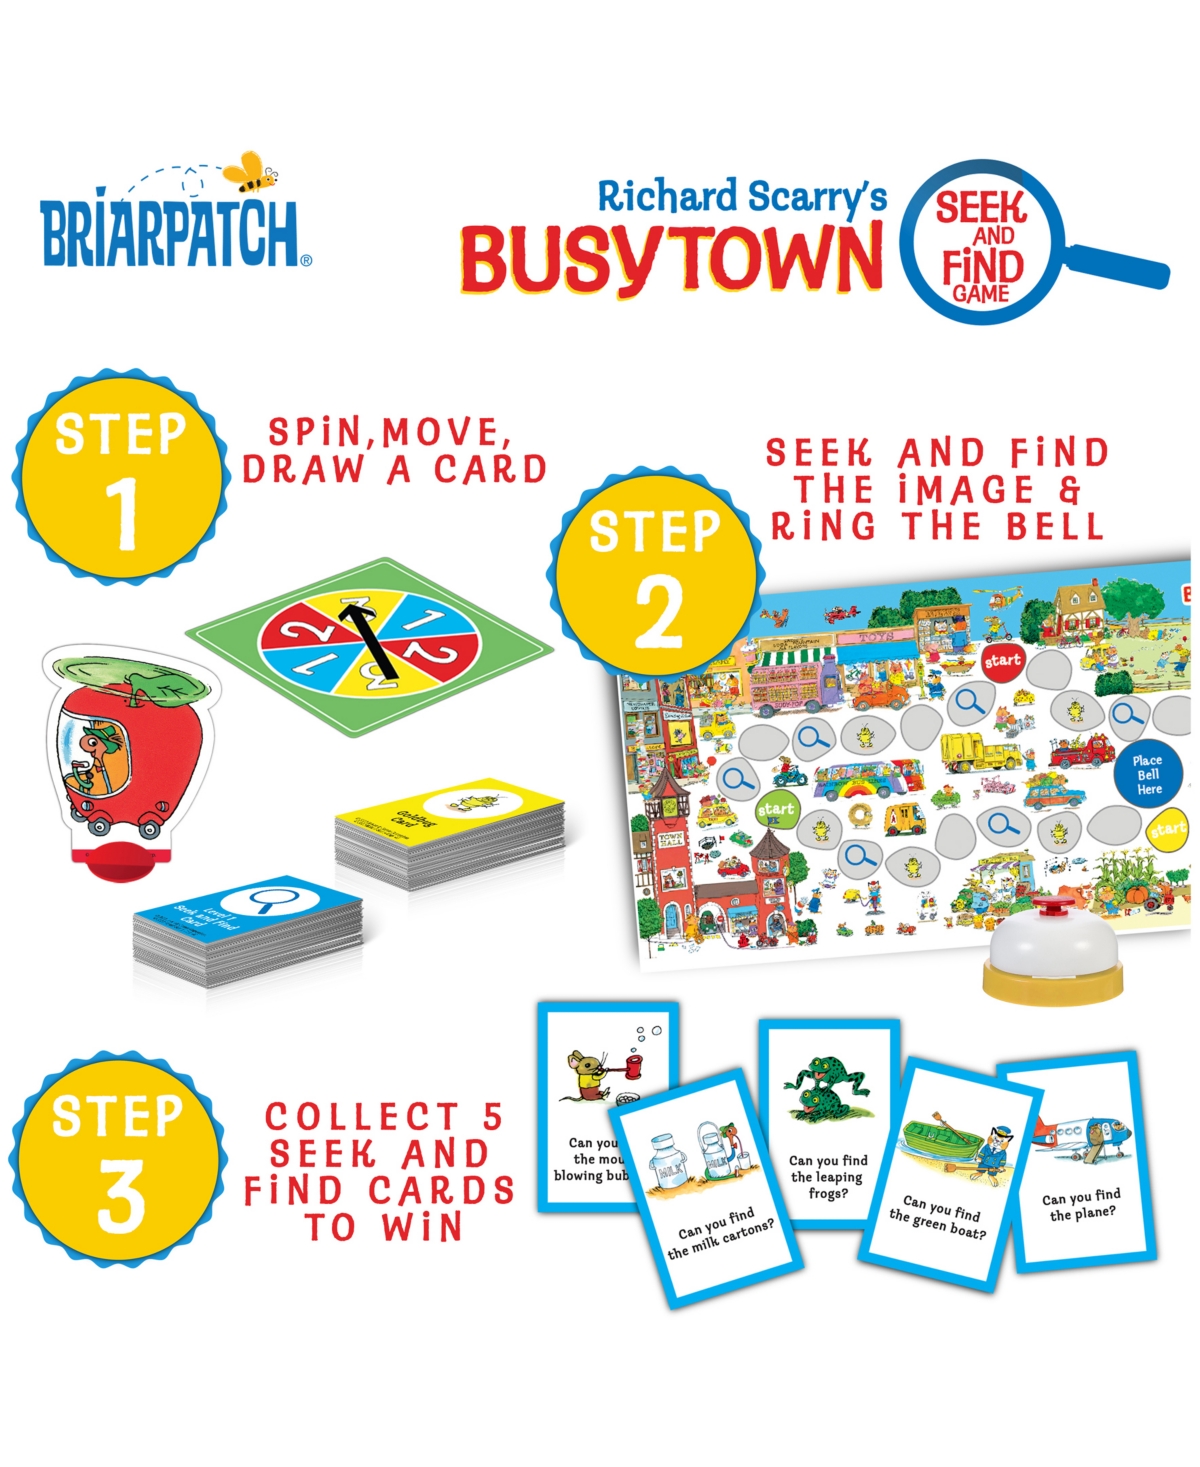 Shop Areyougame Briarpatch Richard Scarry's Busytown Seek And Find Game In No Color